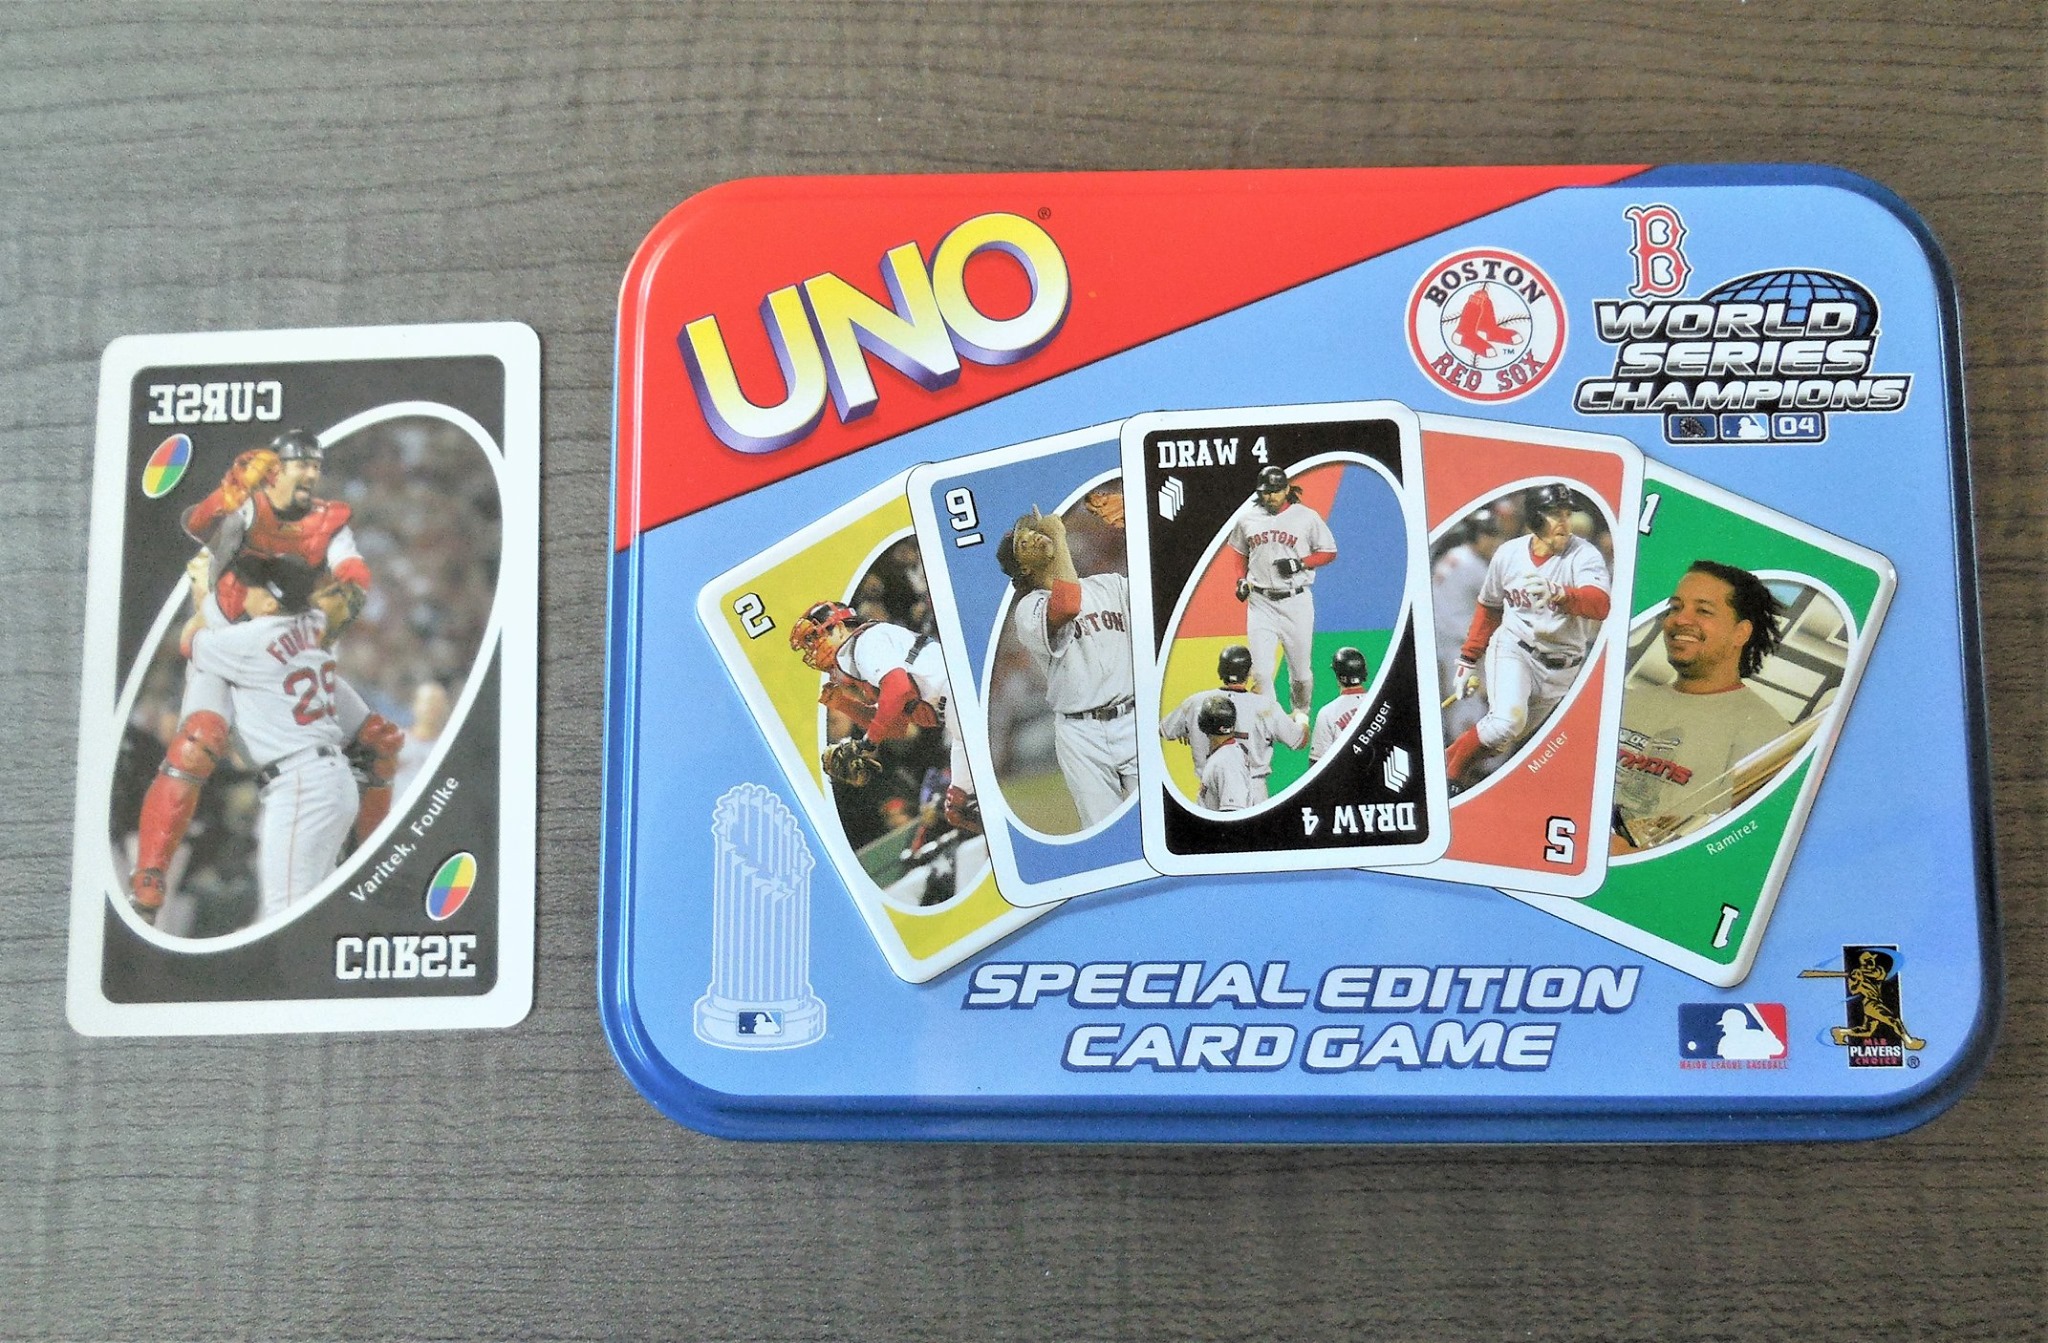 Red Sox Wold Series Champions 2004 Uno Card Game